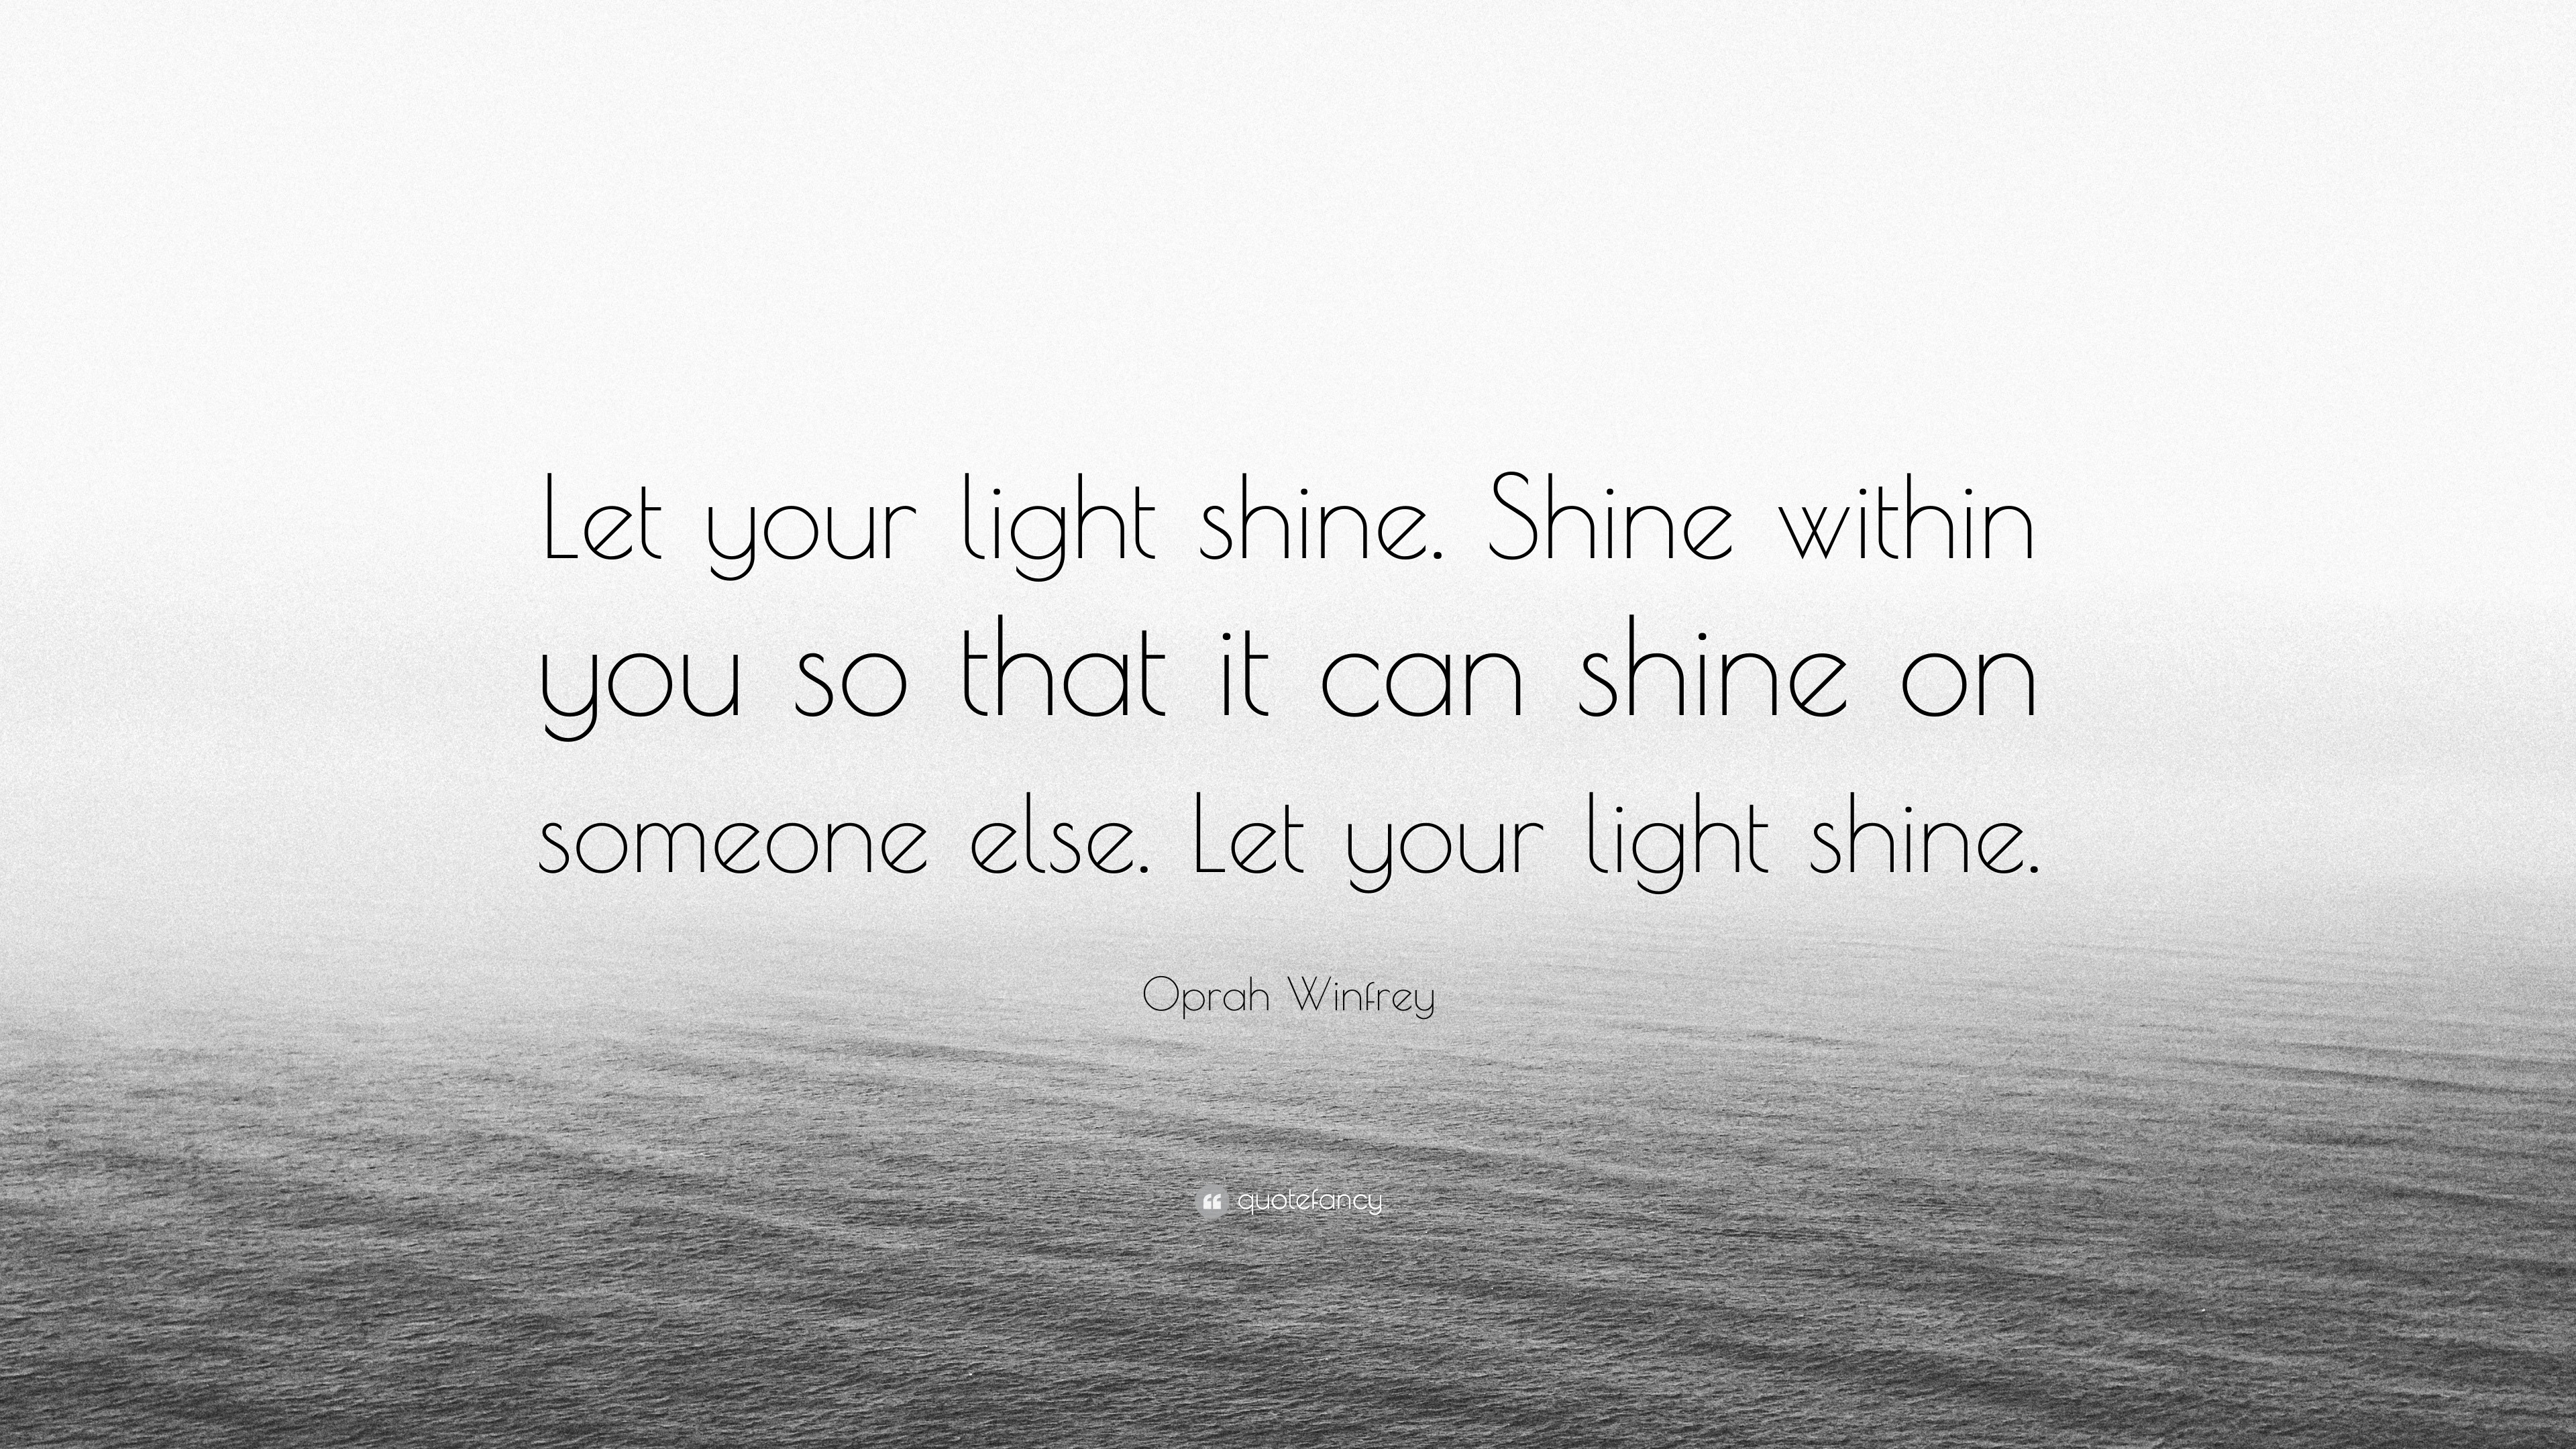 Oprah Winfrey Quote: “Let your light shine. Shine within you so